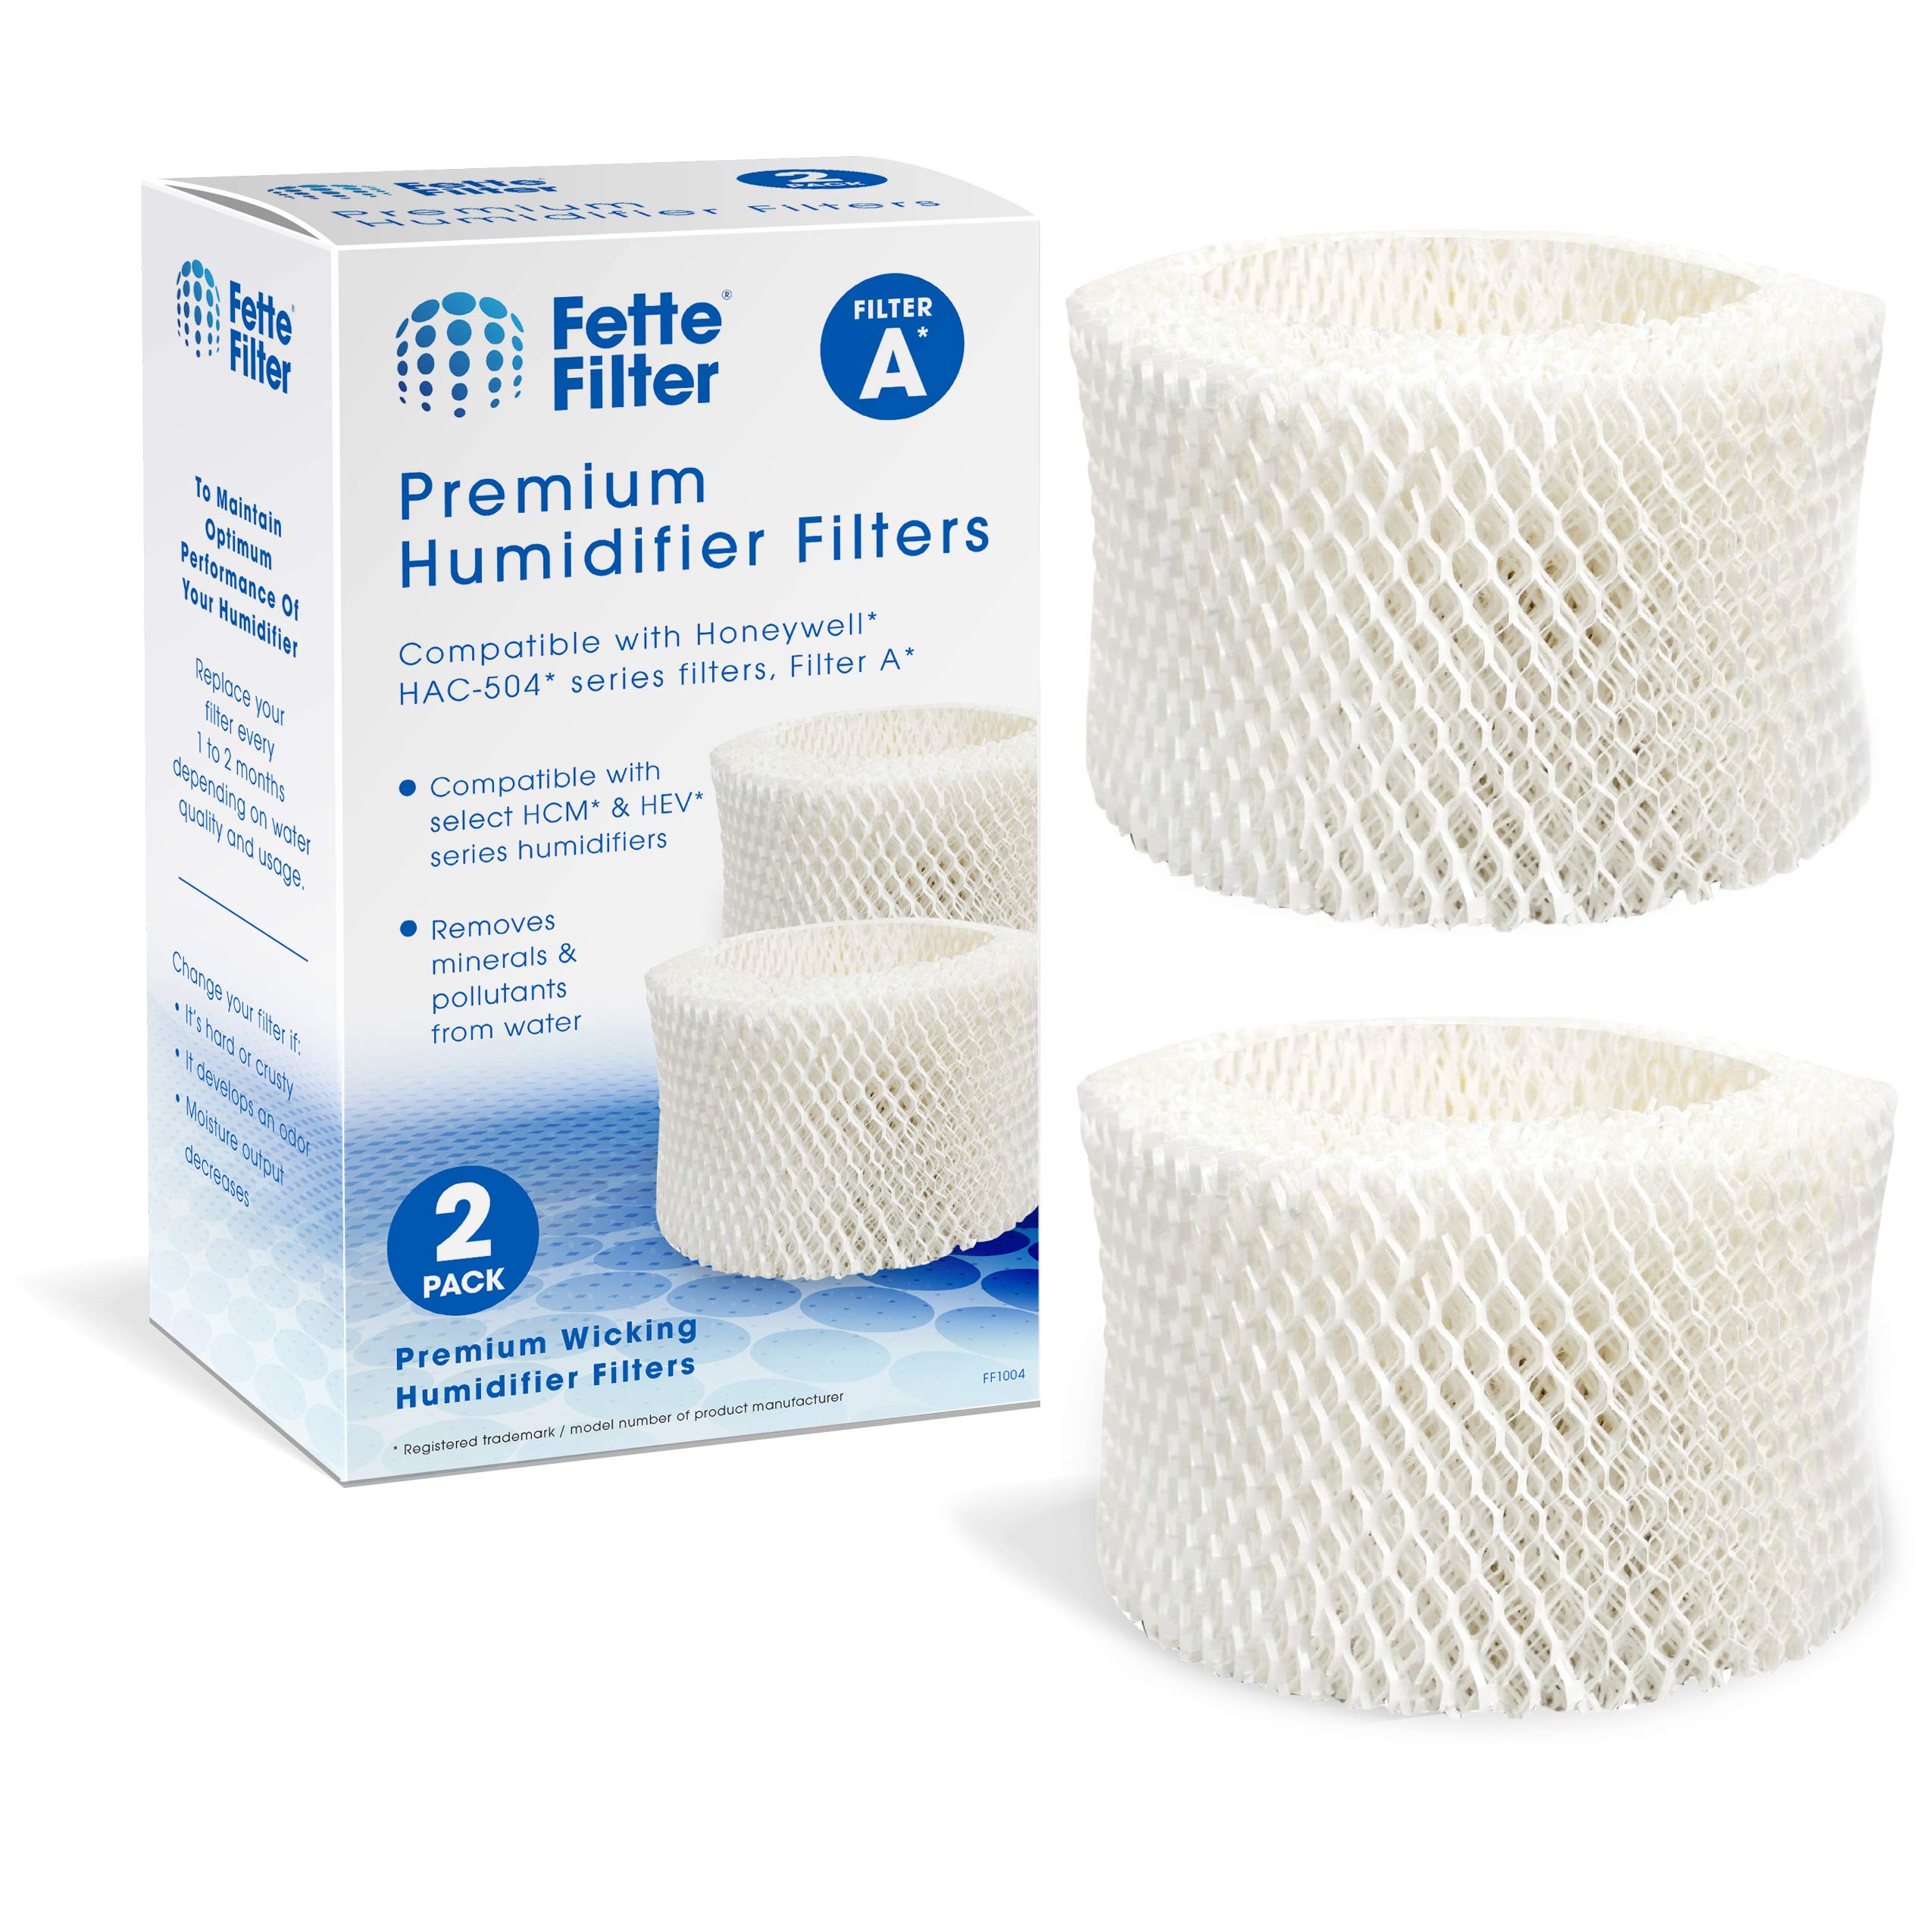 Fette Filter HAC-504 Premium Humidifier Wicking Filter Compatible with Honeywell HAC-504 HAC-504AW HAC504V1 Humidifier Replacement Filter A R